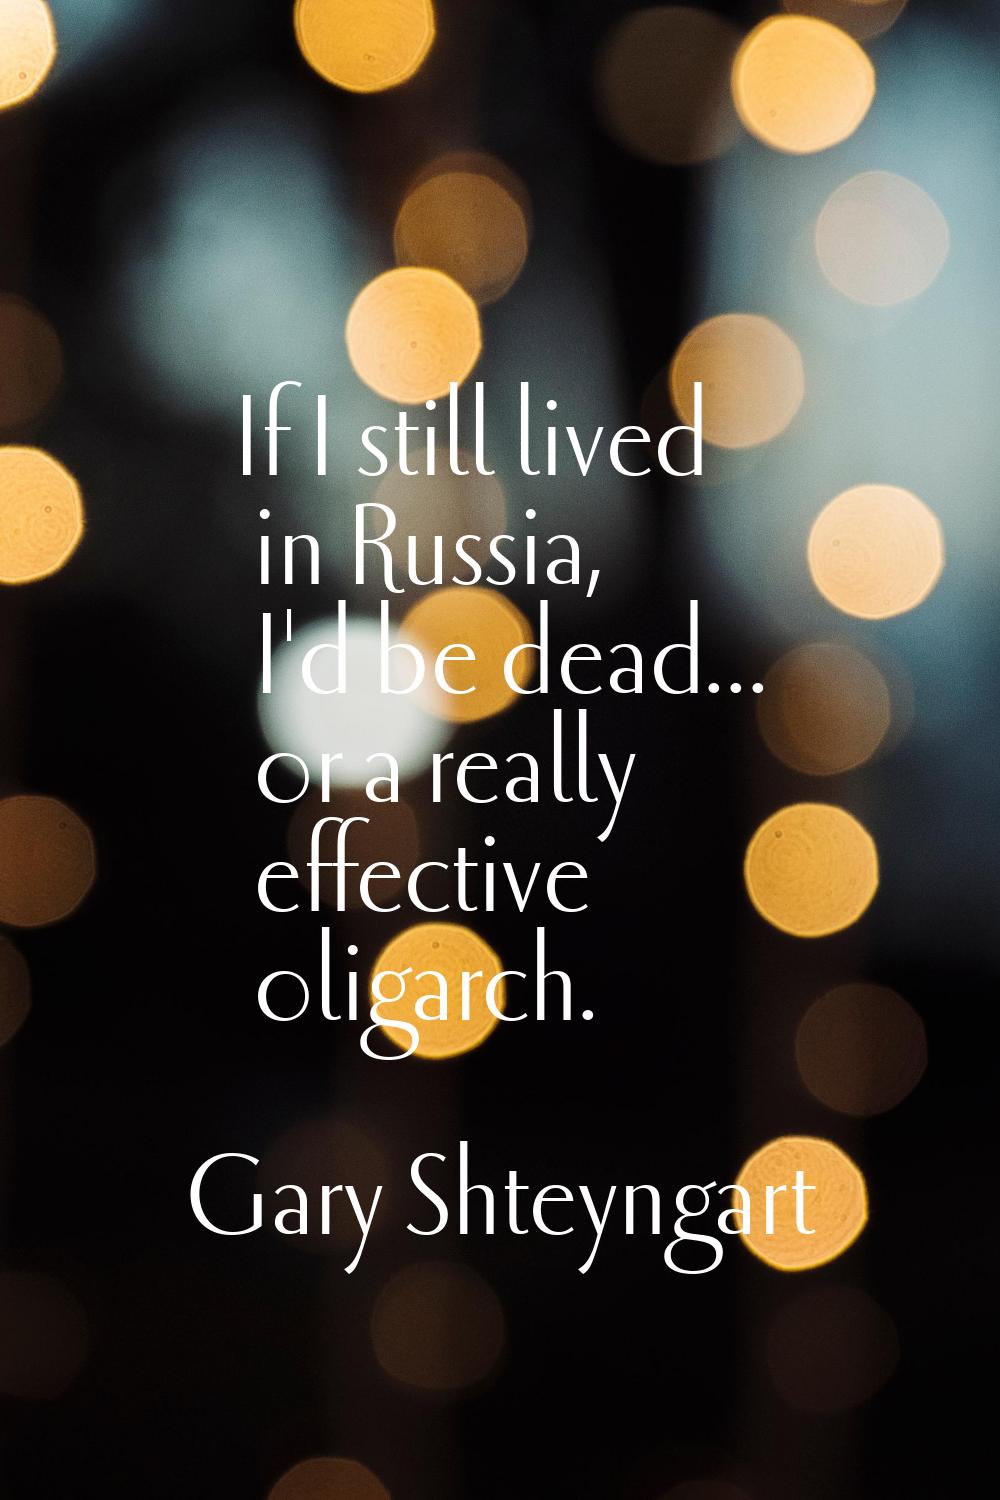 If I still lived in Russia, I'd be dead... or a really effective oligarch.